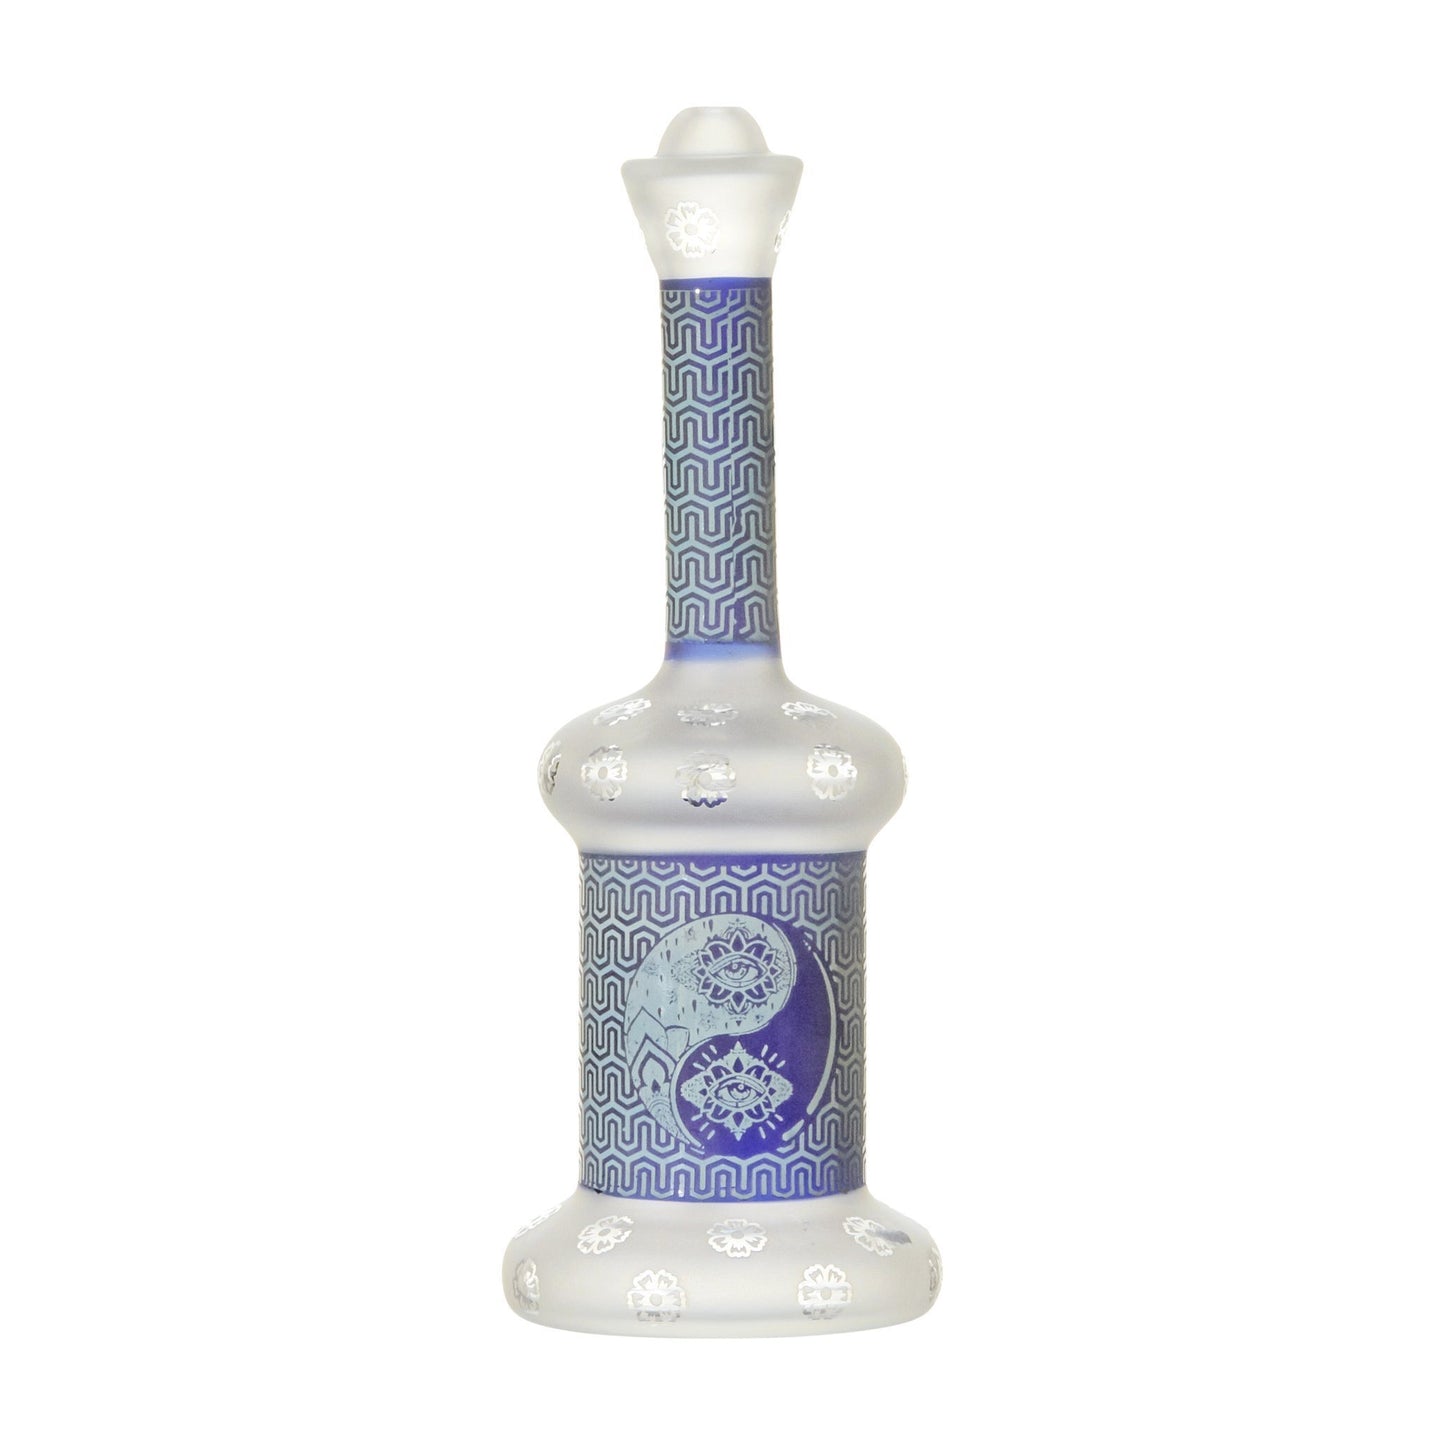 9-inch cylinder bong smoking device built-in downstem with Eastern Art design on frosted glass floral print